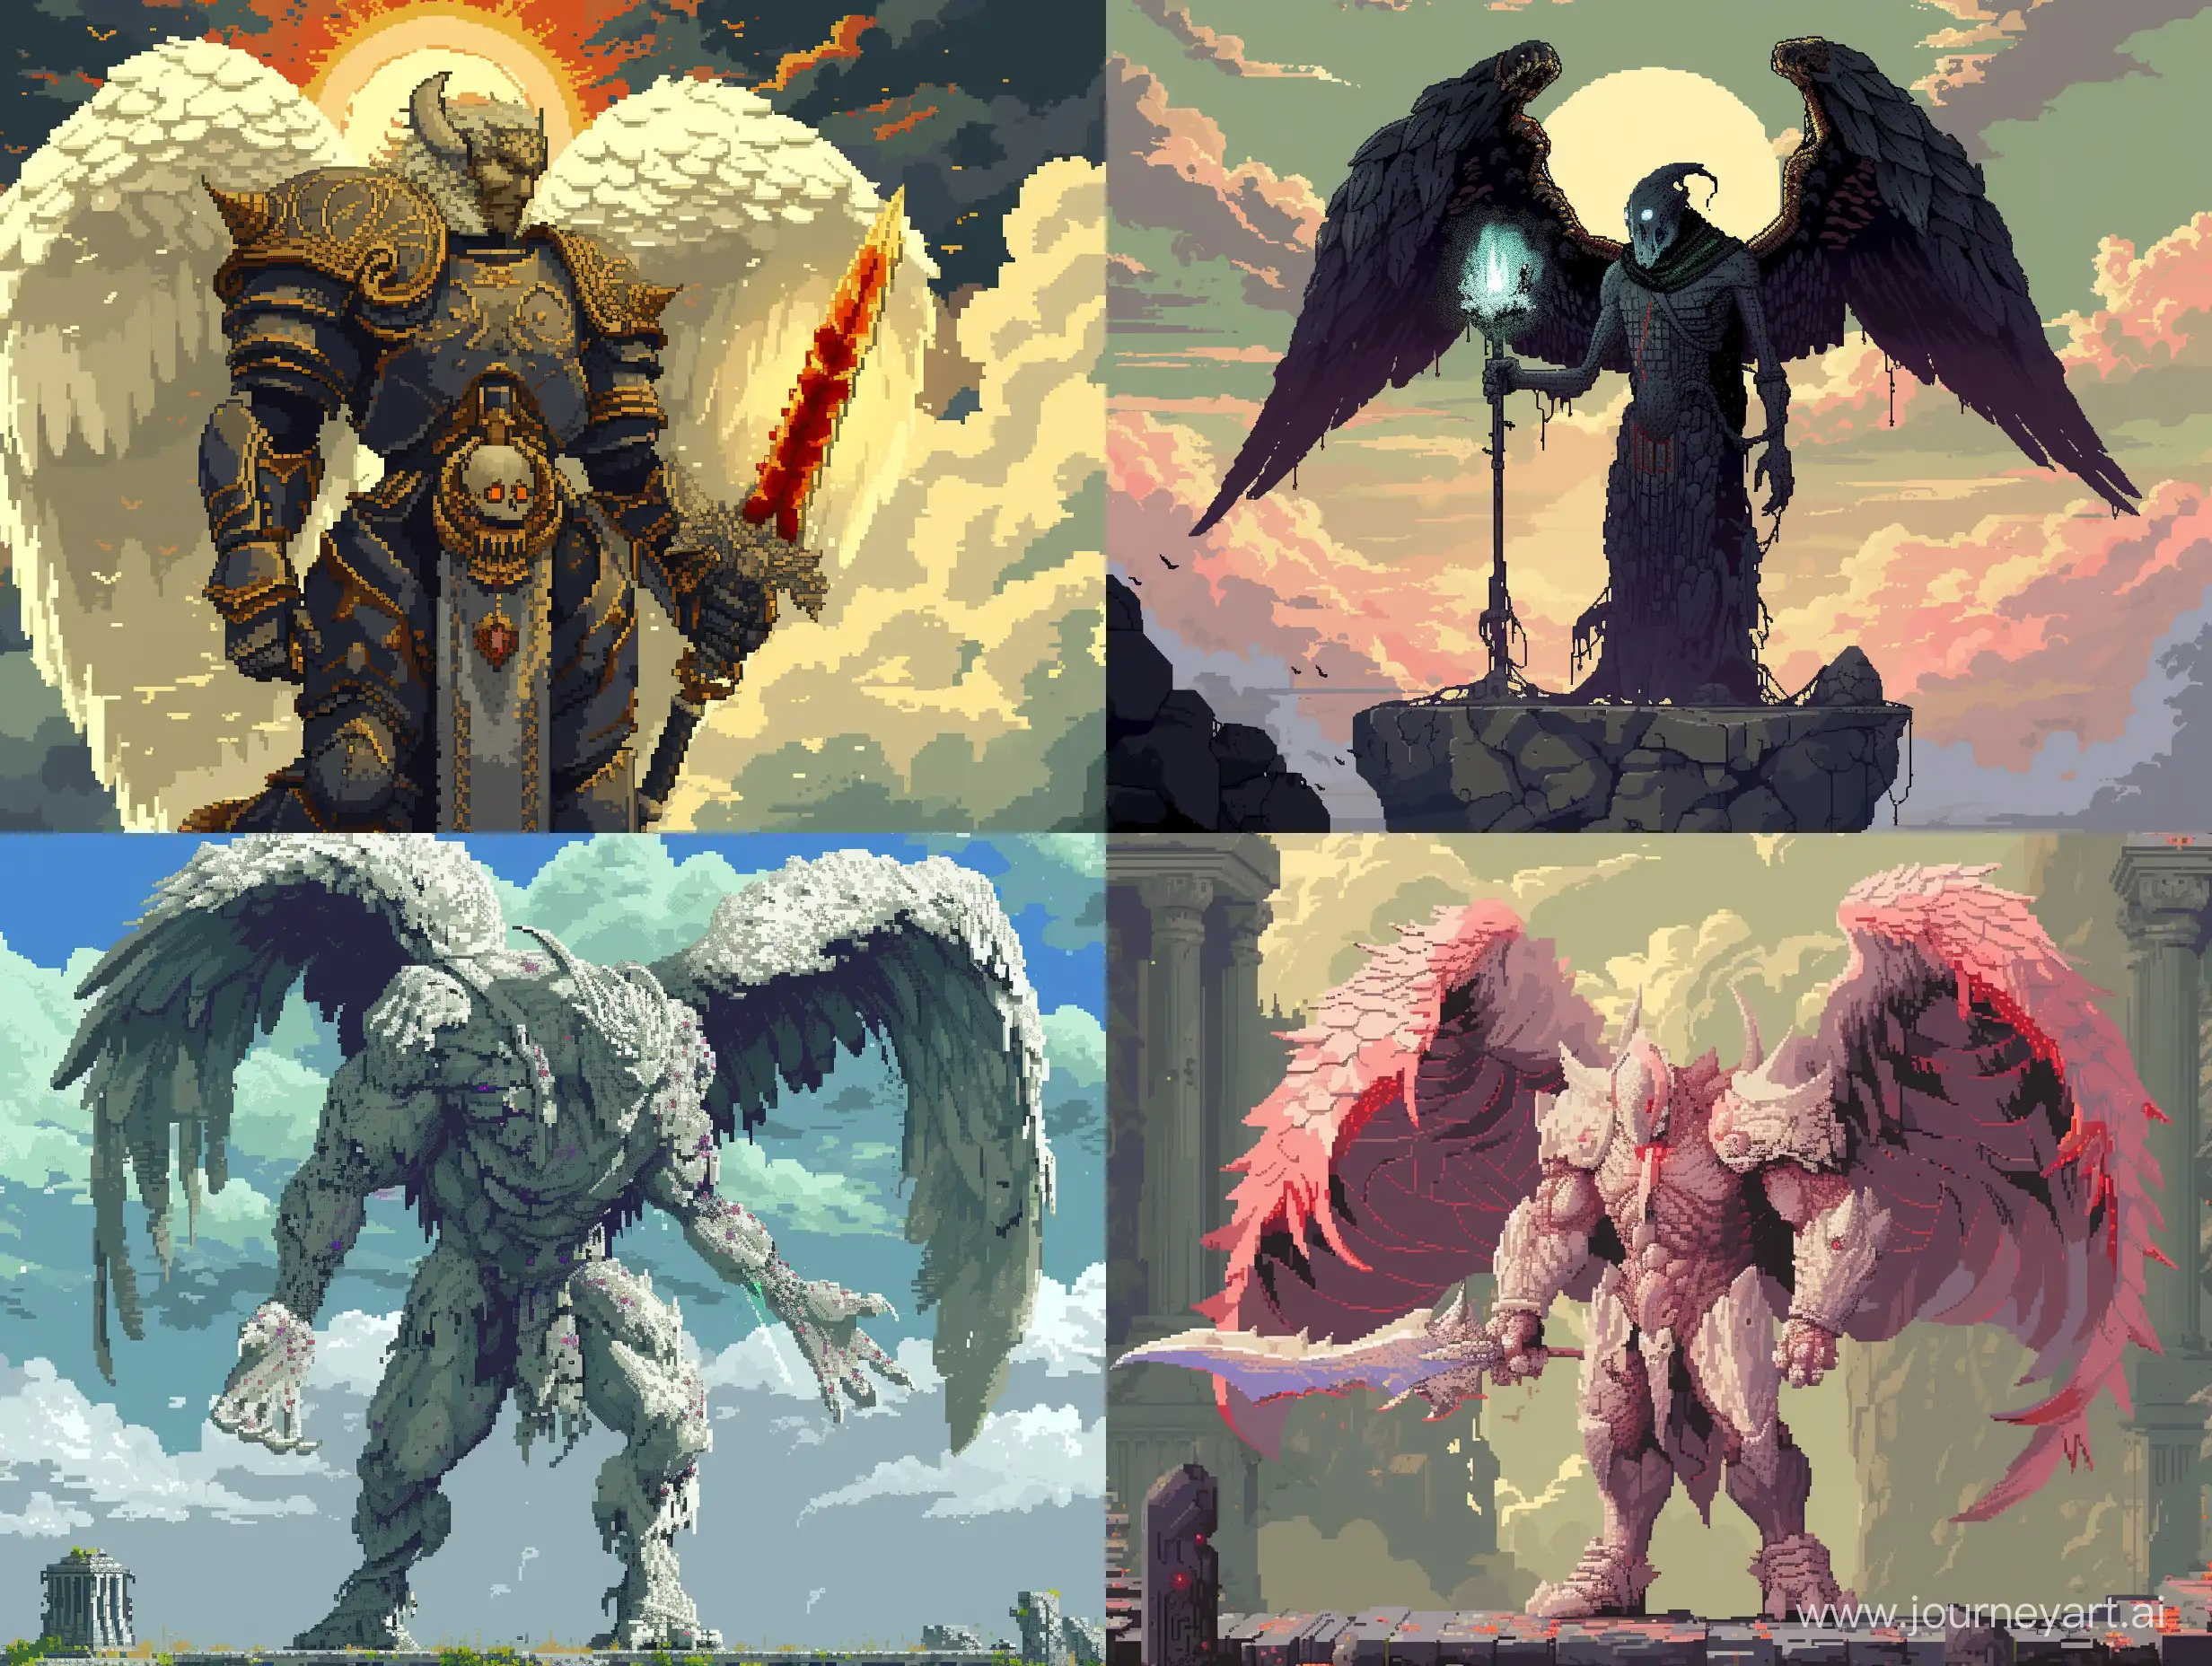 The antagonist character, an ancient titan named Seraphim. Pixel-art style.